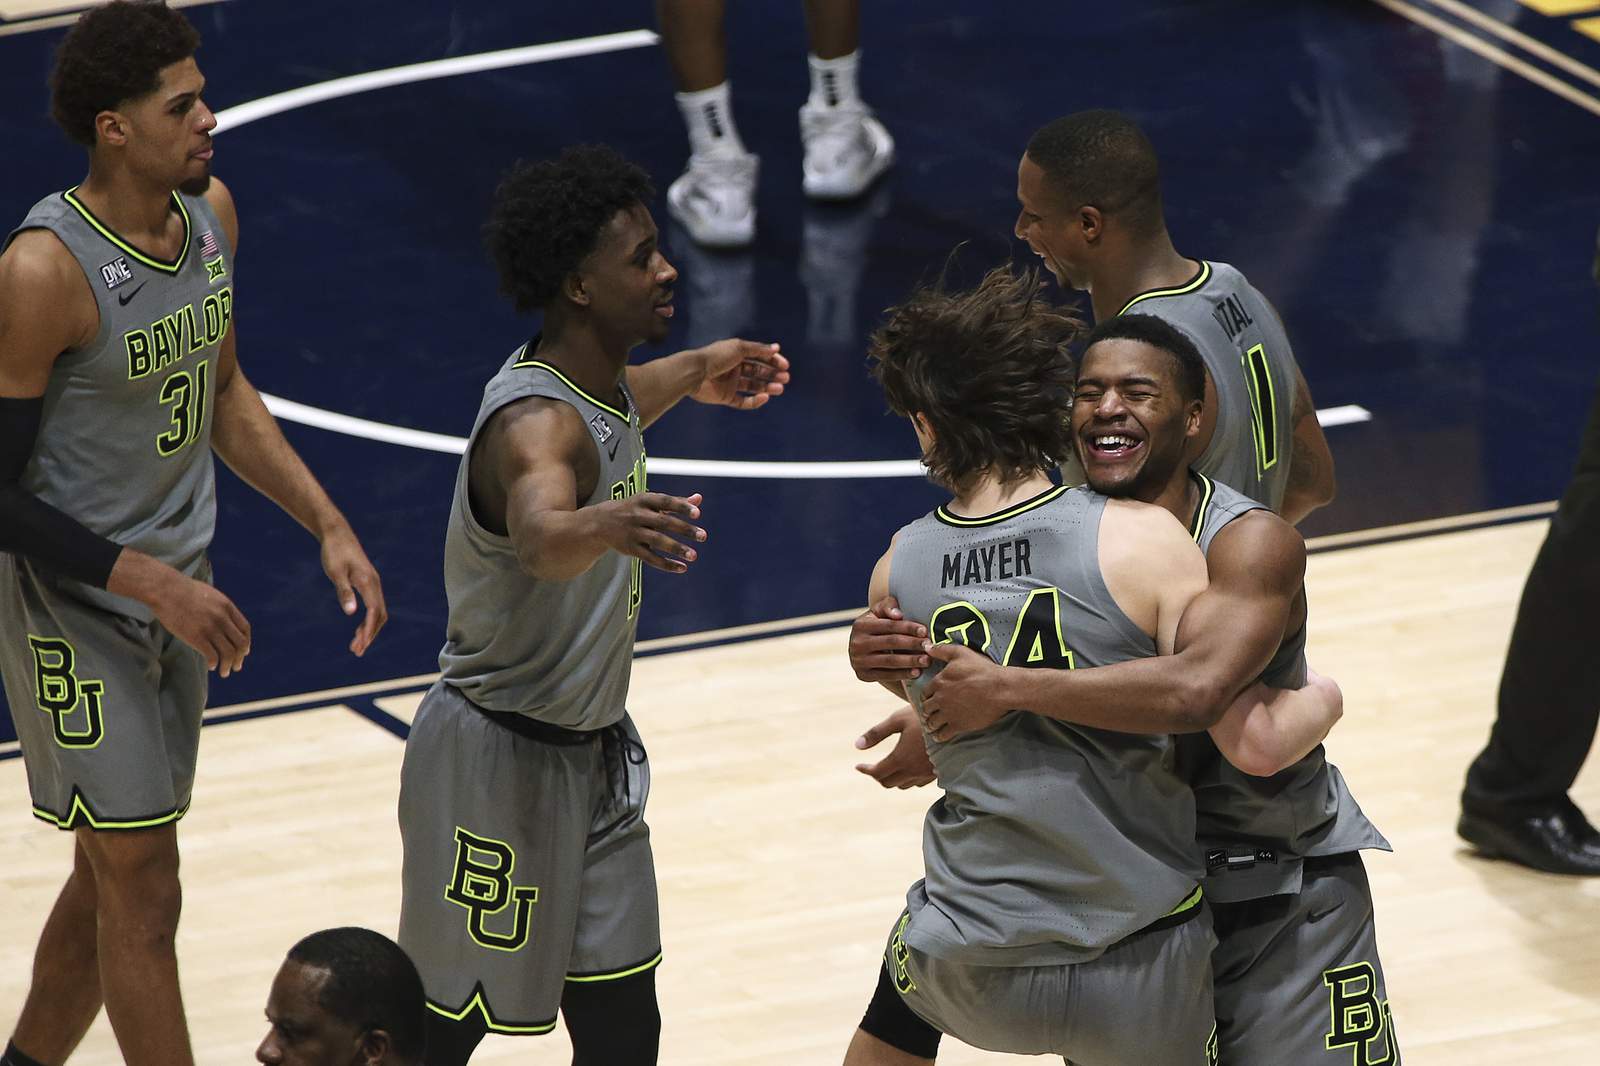 Baylor headlines South Region bracket with first No. 1 seed